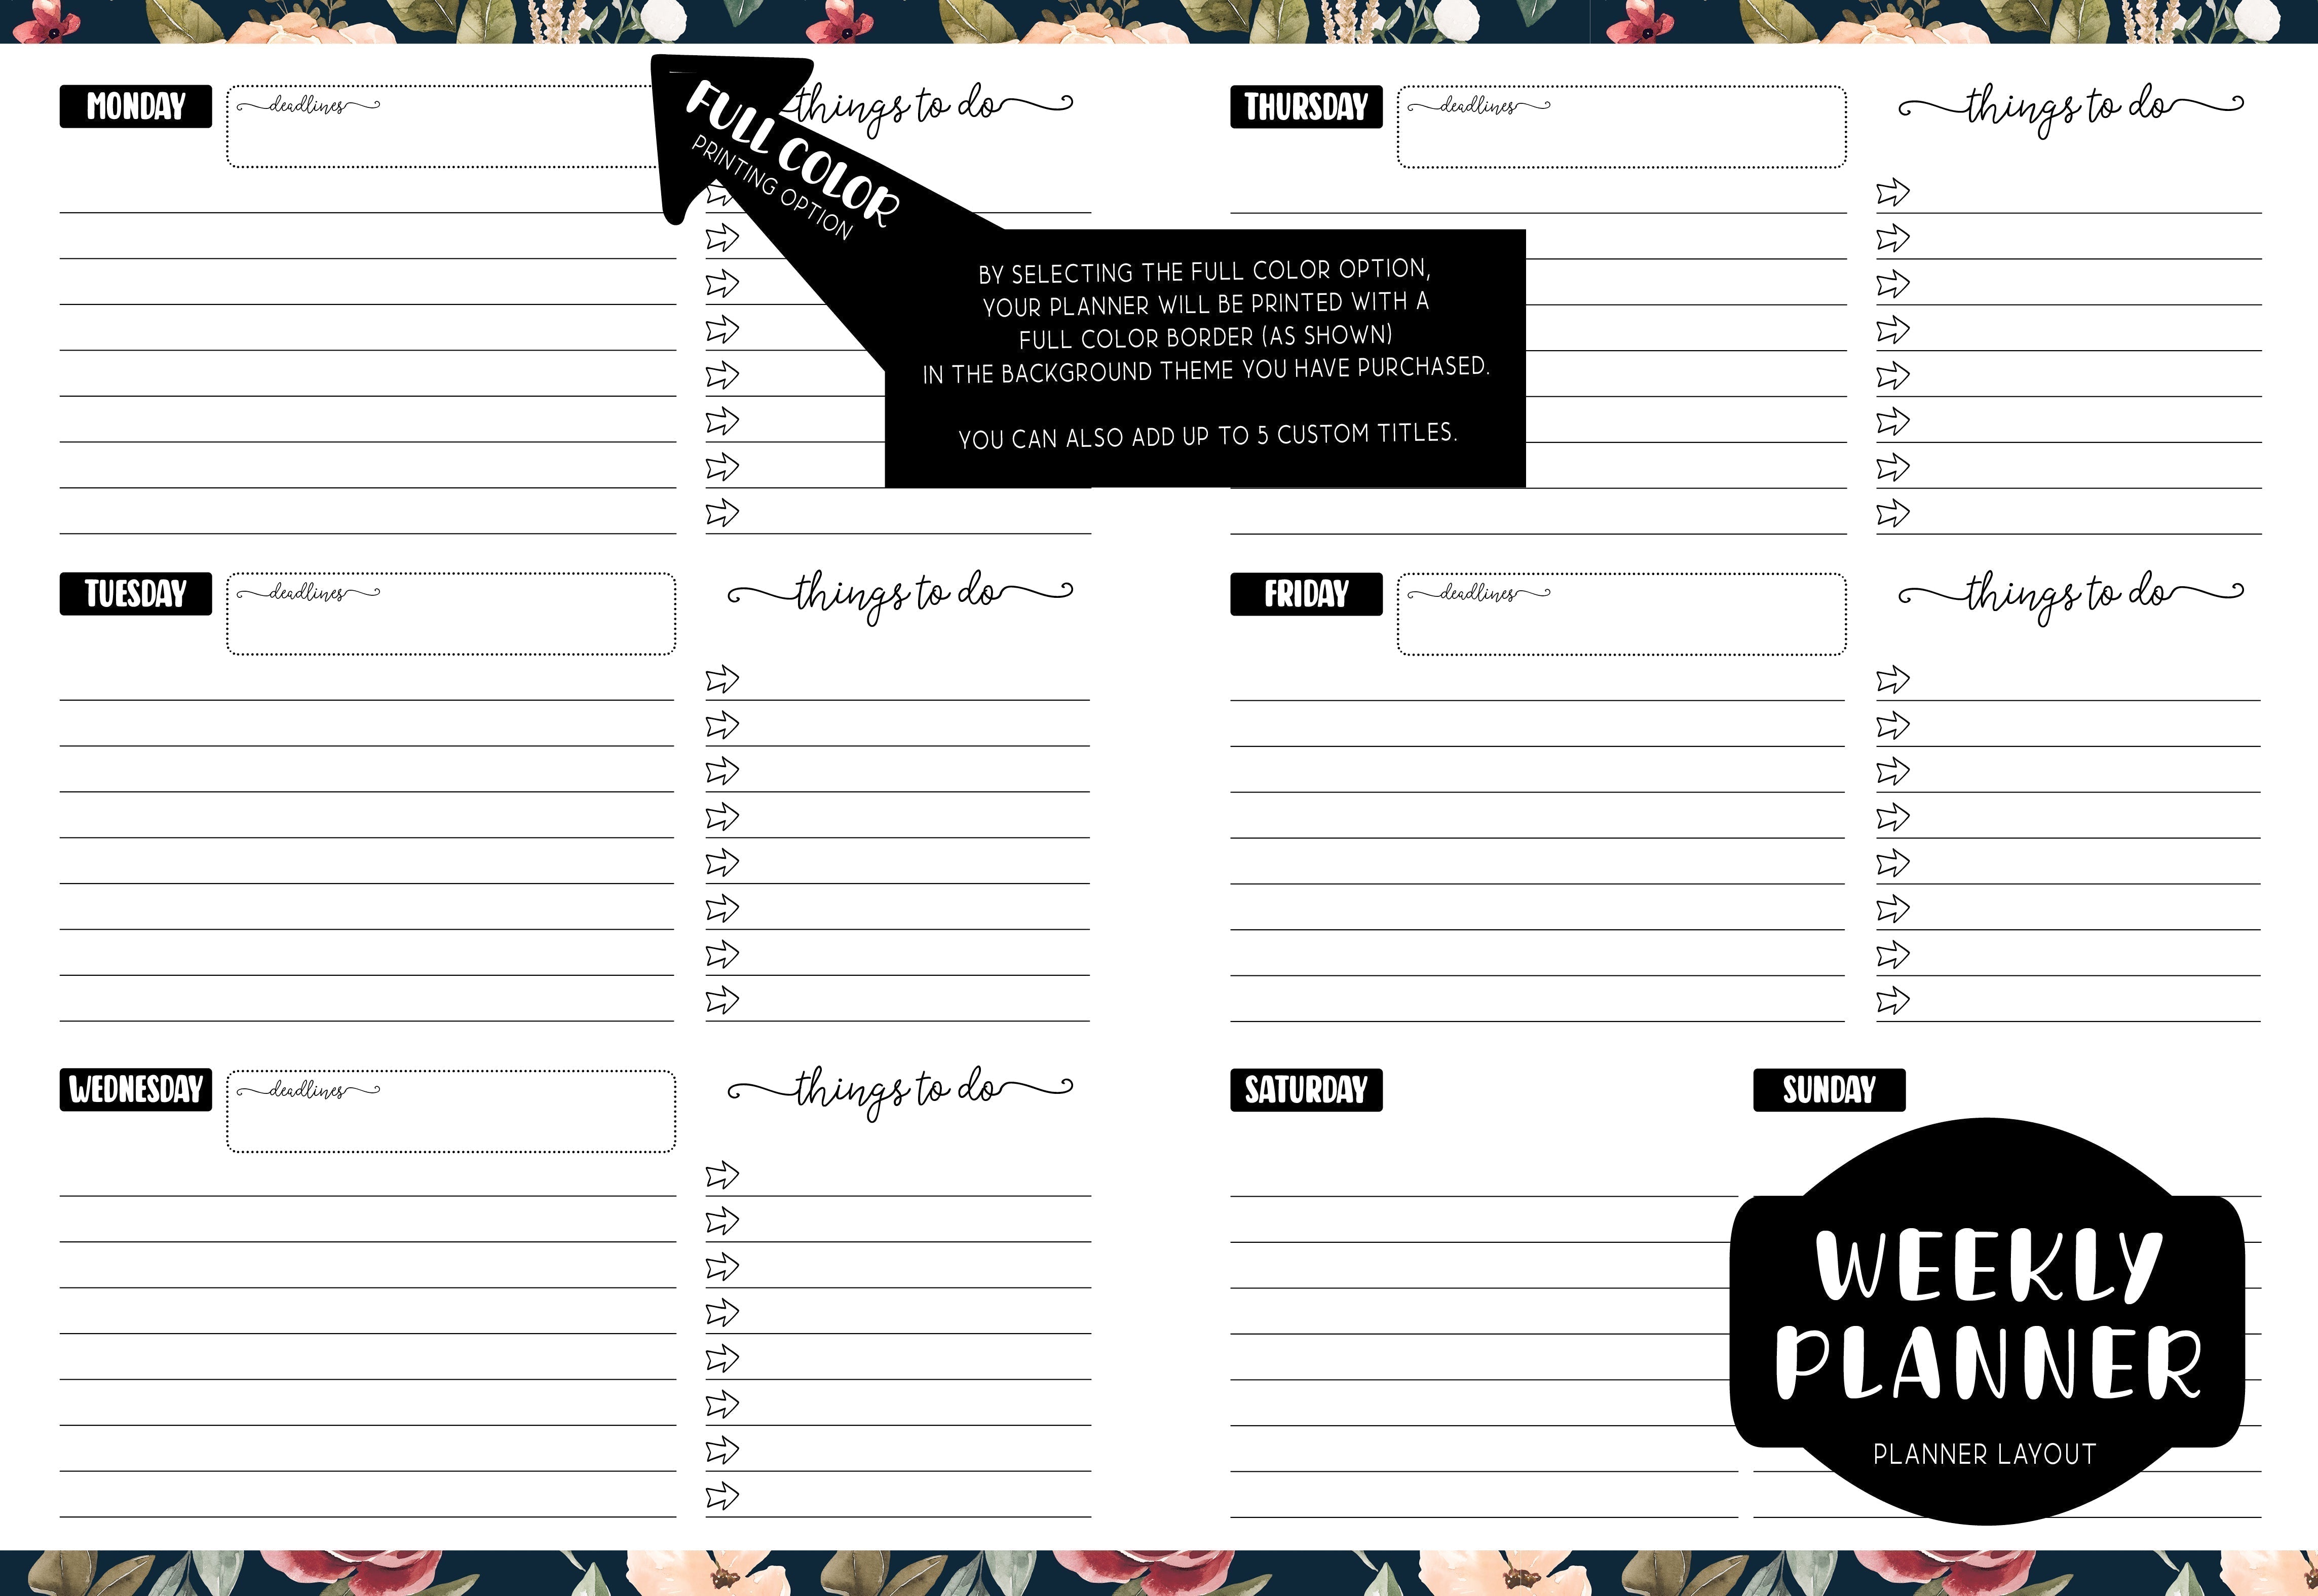 Weekly Planner - GOLD MARBLE